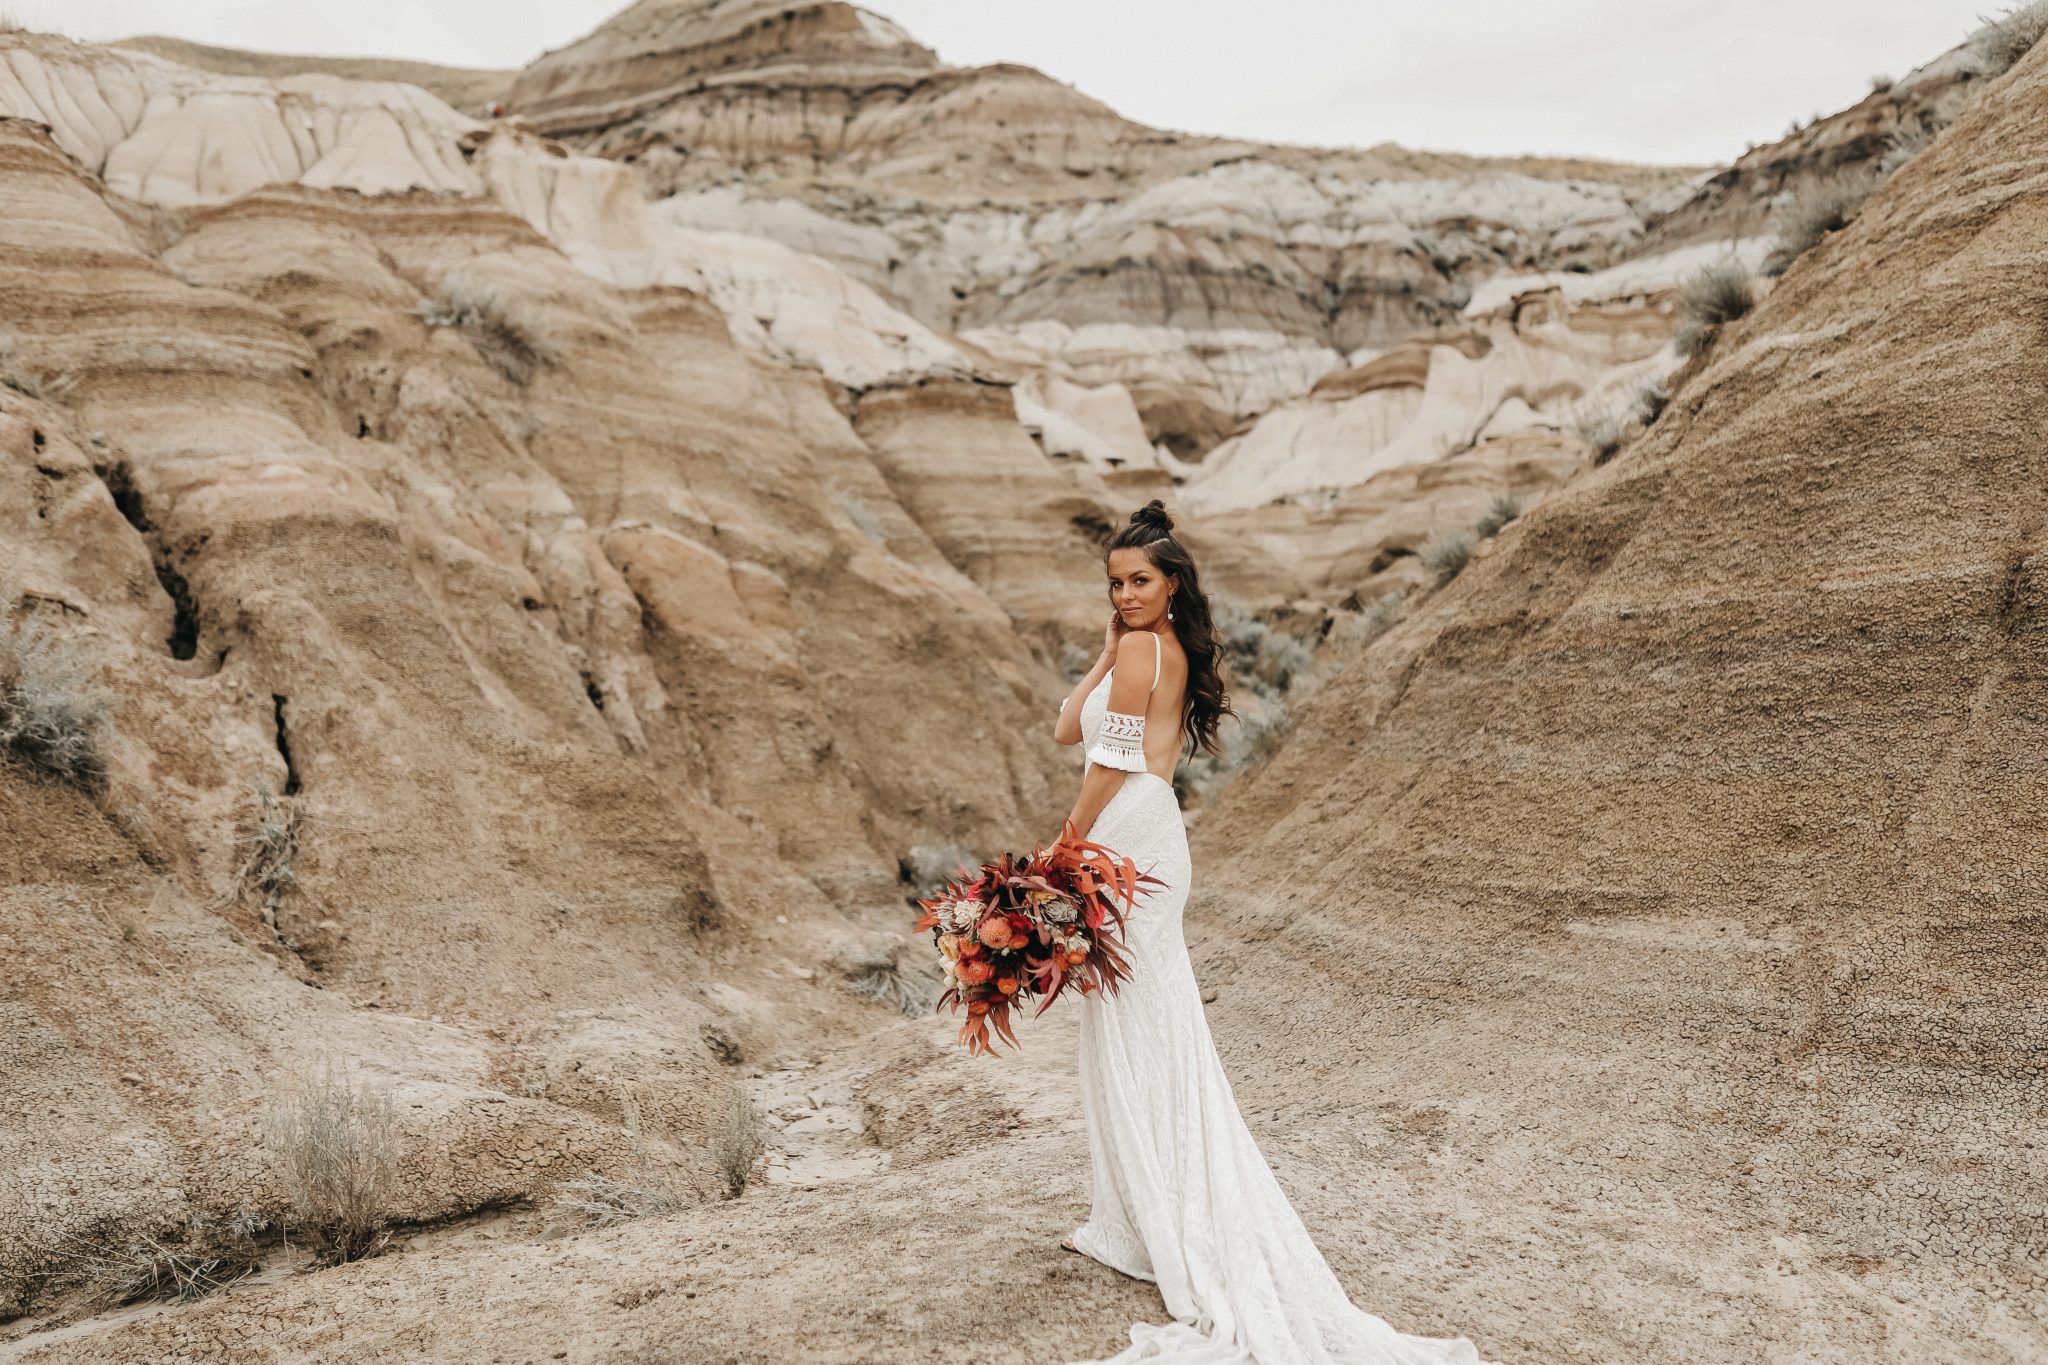 Bride poses in a lace dress against the sand hills of Drumheller for this Moroccan inspired elopement